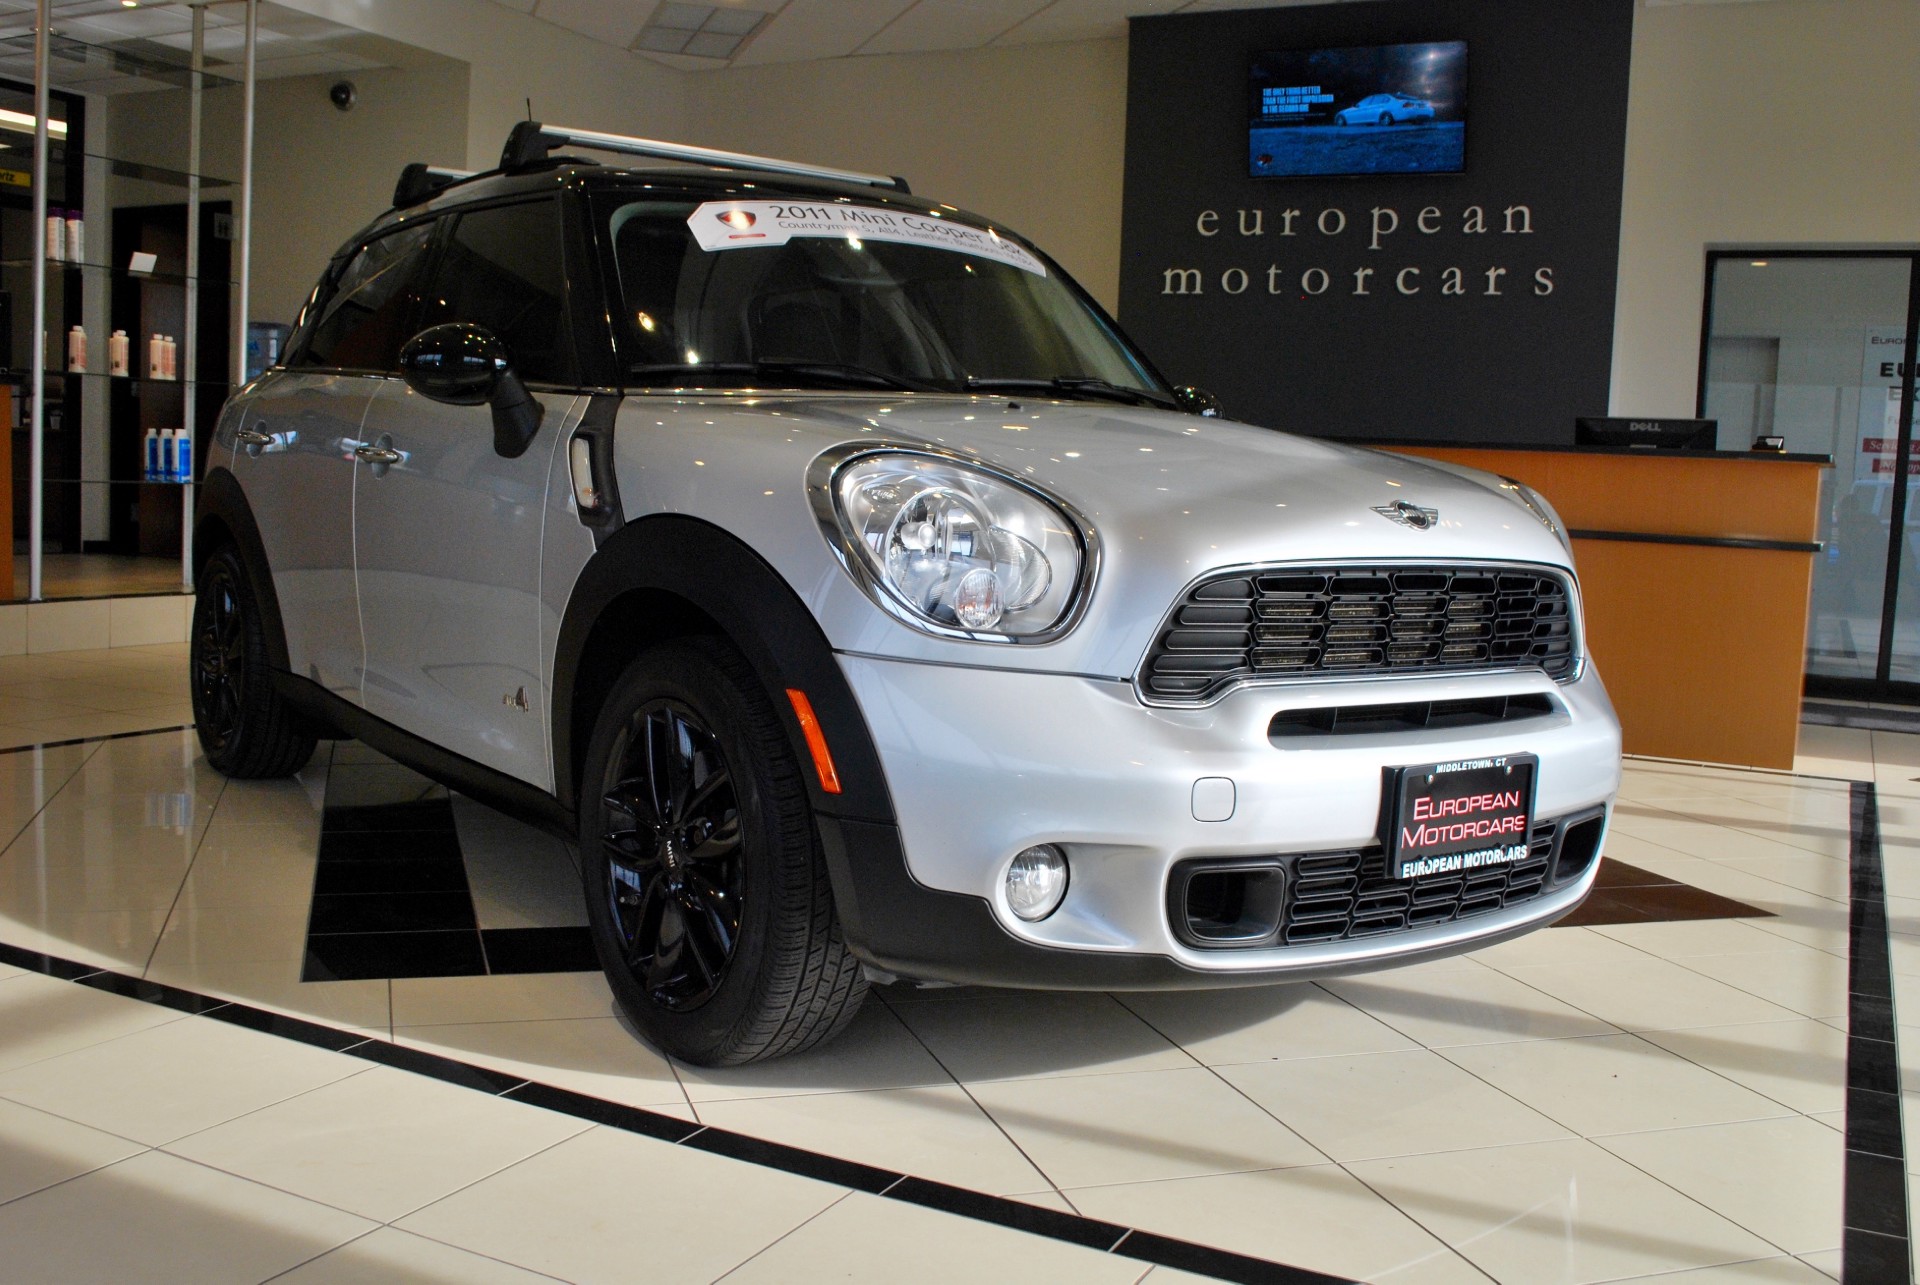 2011 MINI Cooper Countryman S ALL4 for sale near Middletown, CT | CT ...